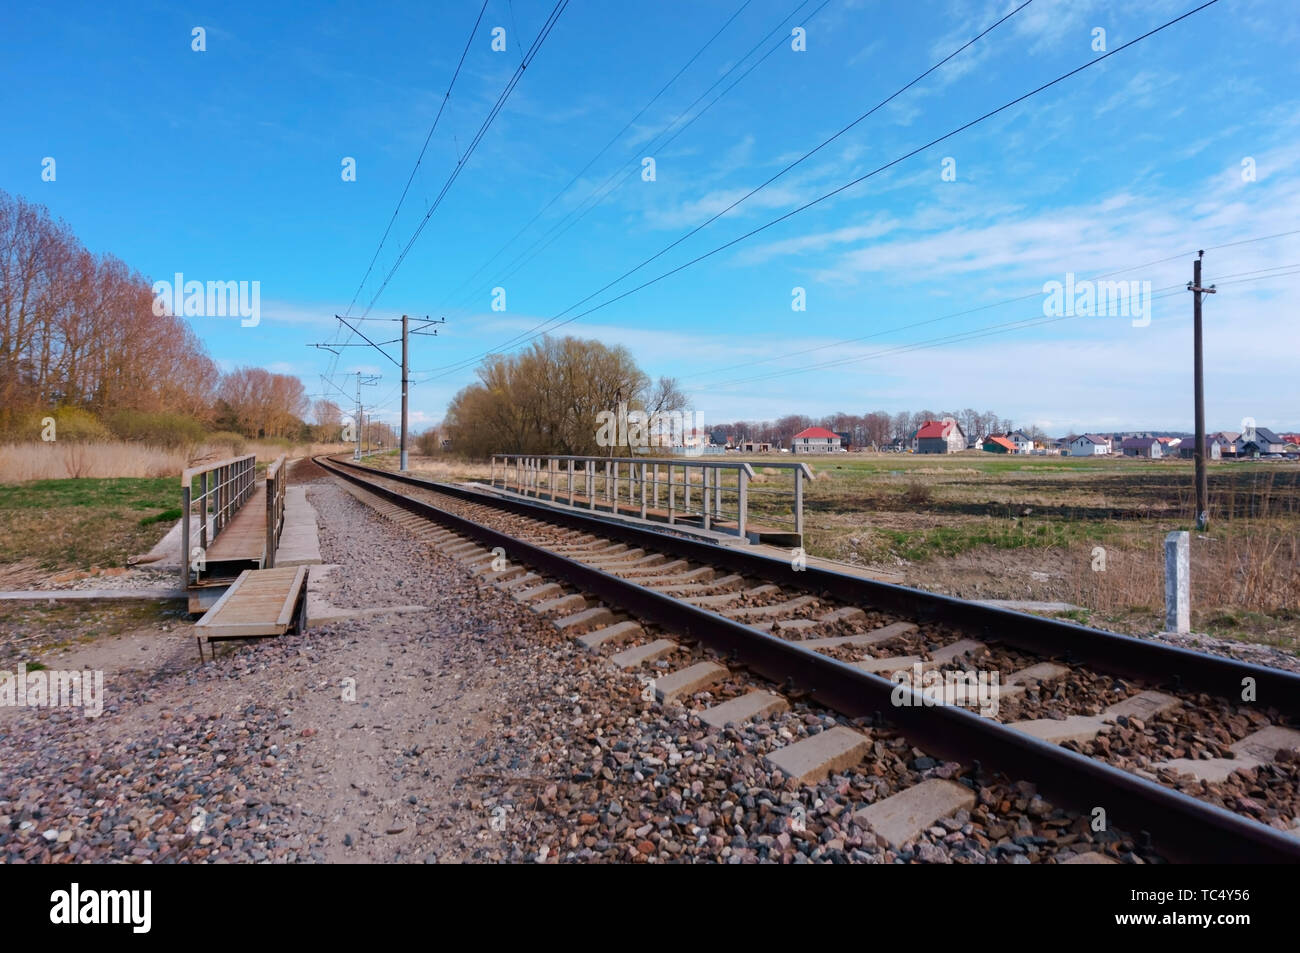 railway stretching into the distance, rails in three rows Stock Photo